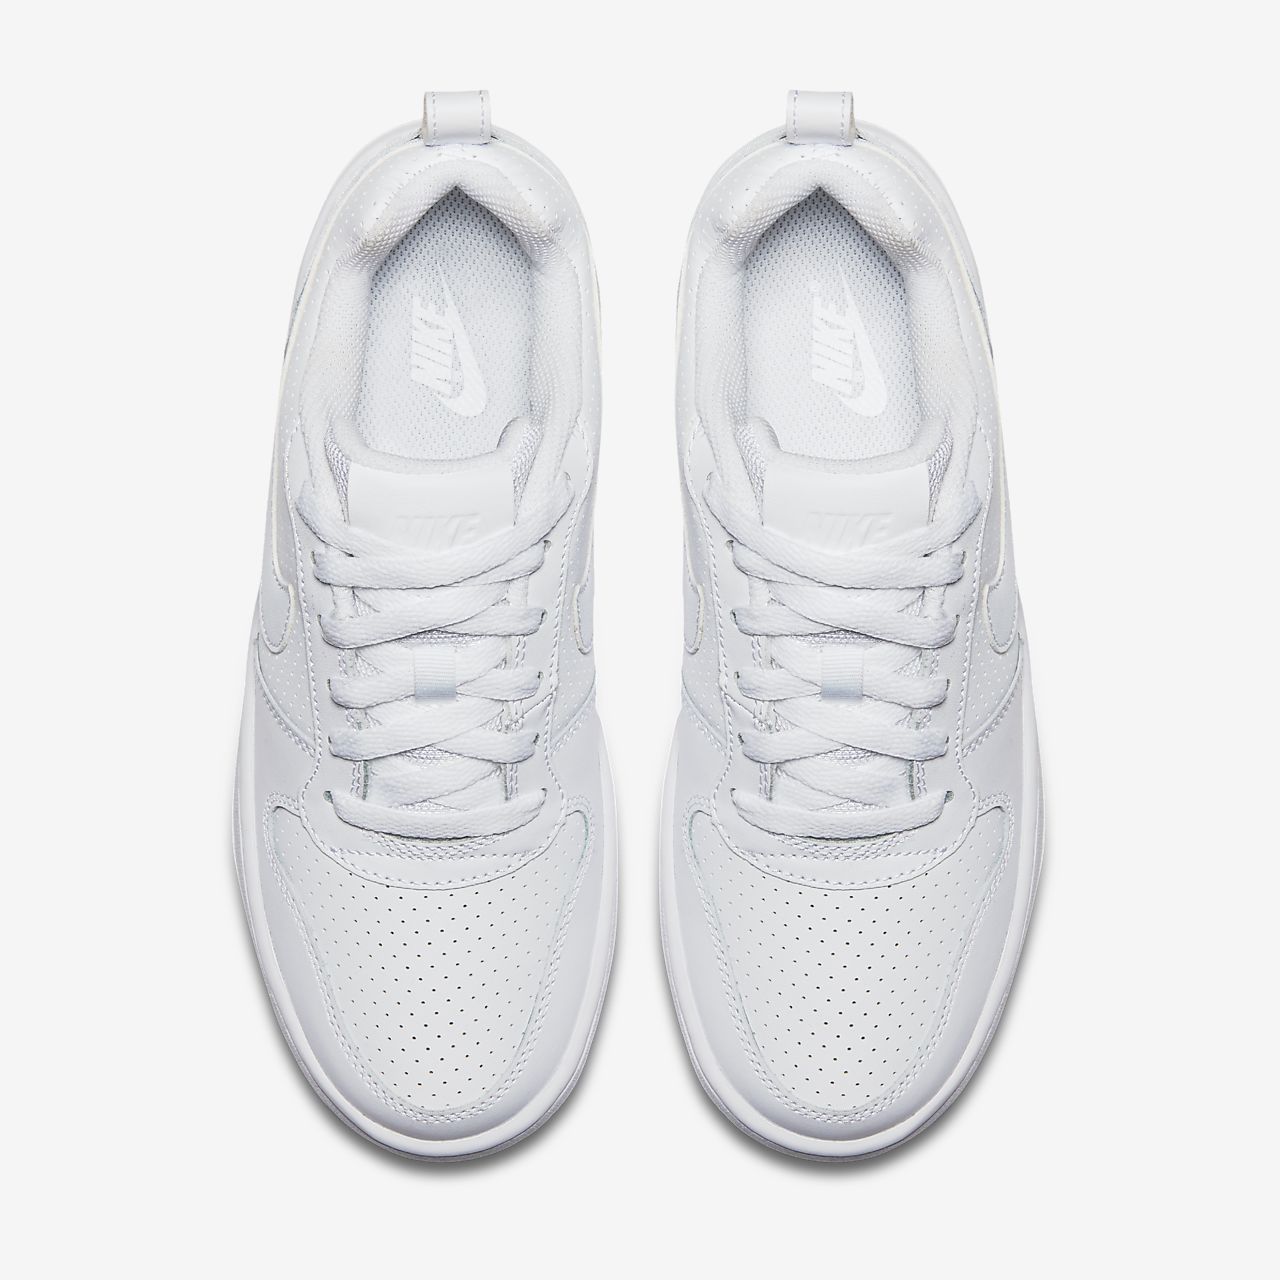 chaussure nike blanche fille